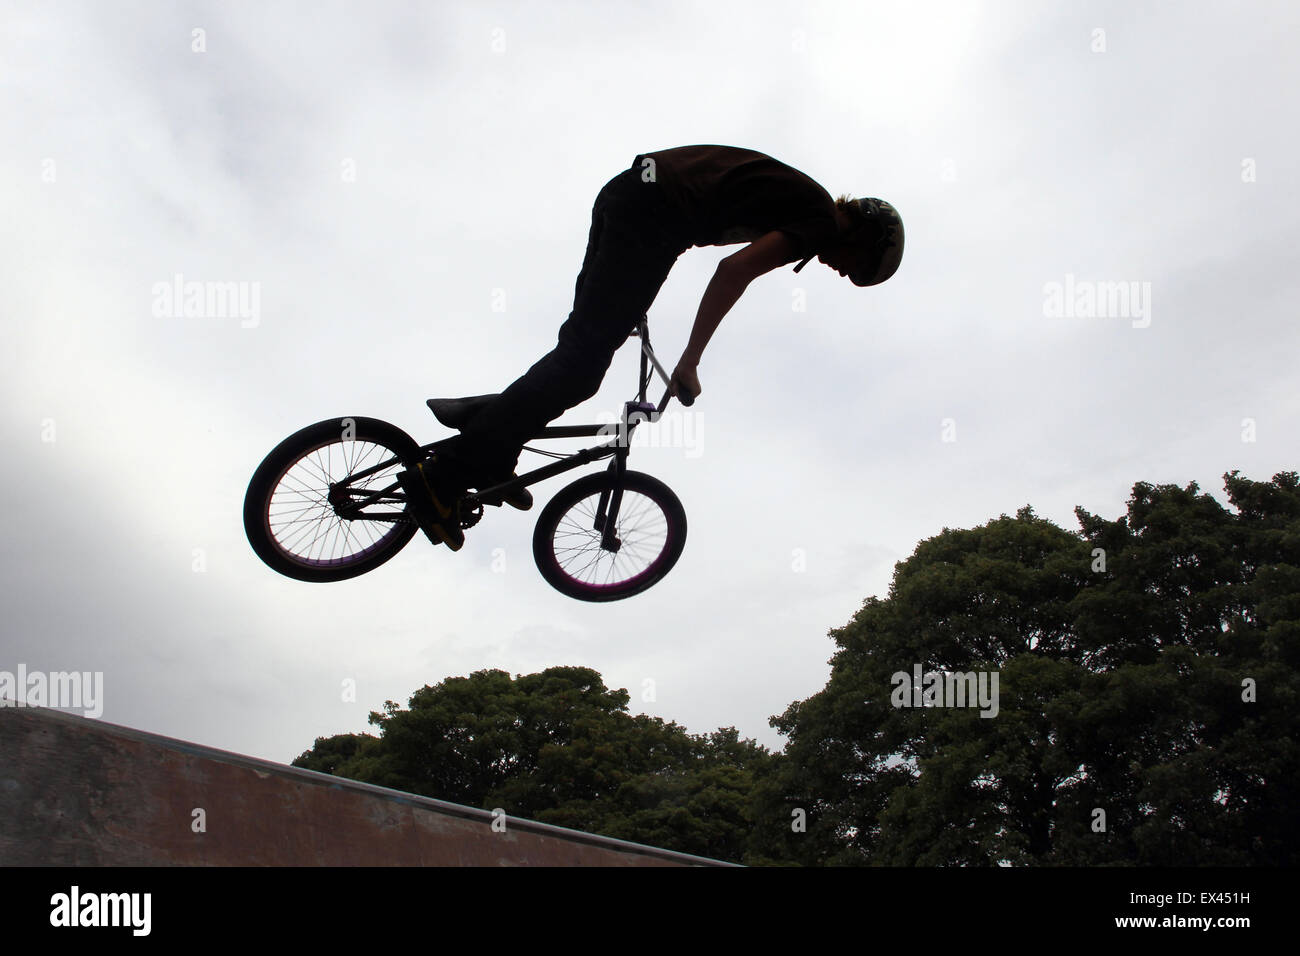 BMX cyclist silhouetted against grey sky Stock Photo